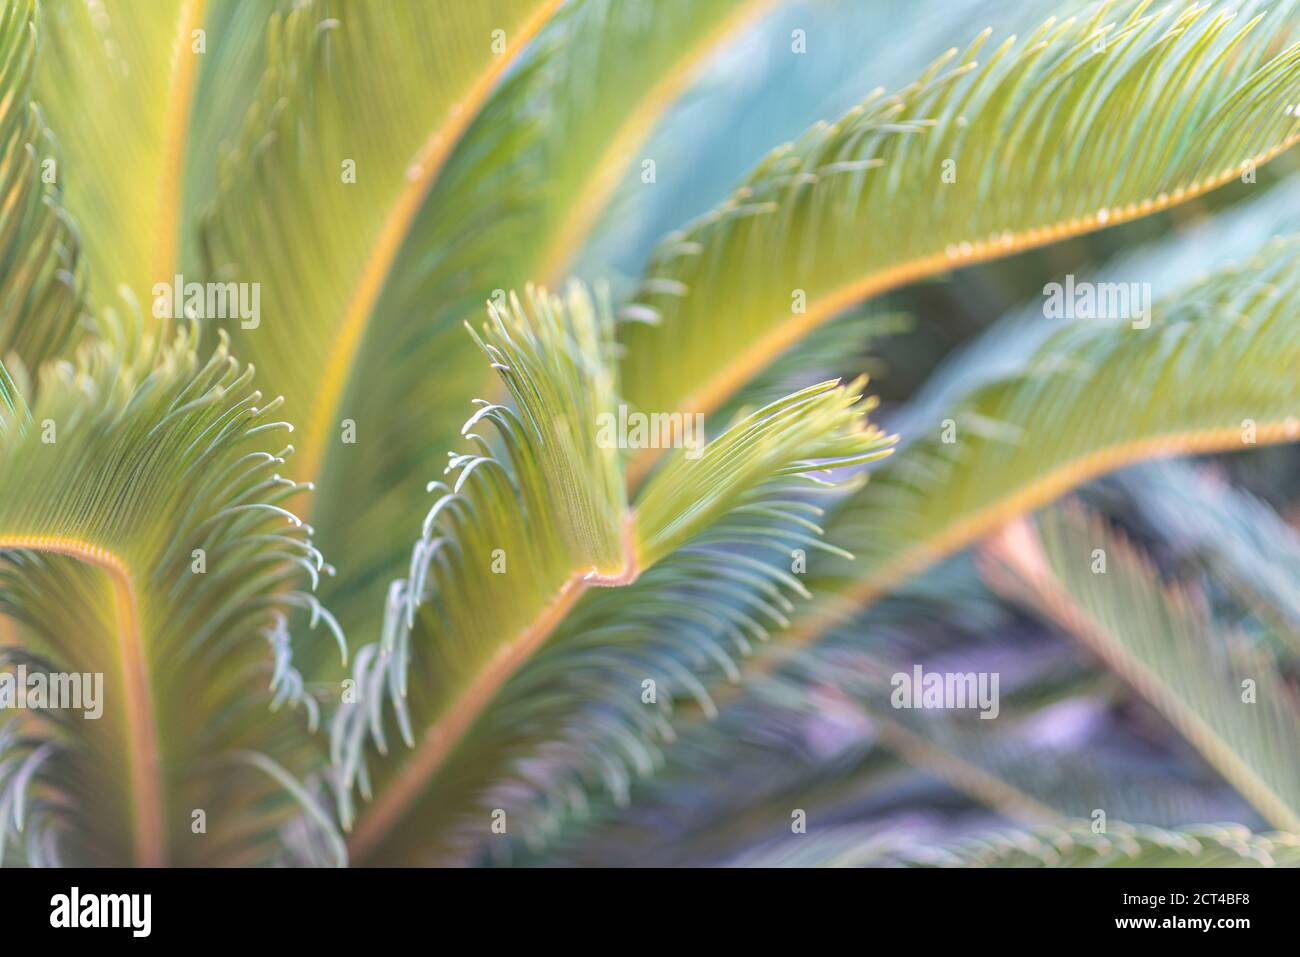 Green and yellow palm tree leaves in bright sunshine. Abstract nature blurred background. Stock Photo